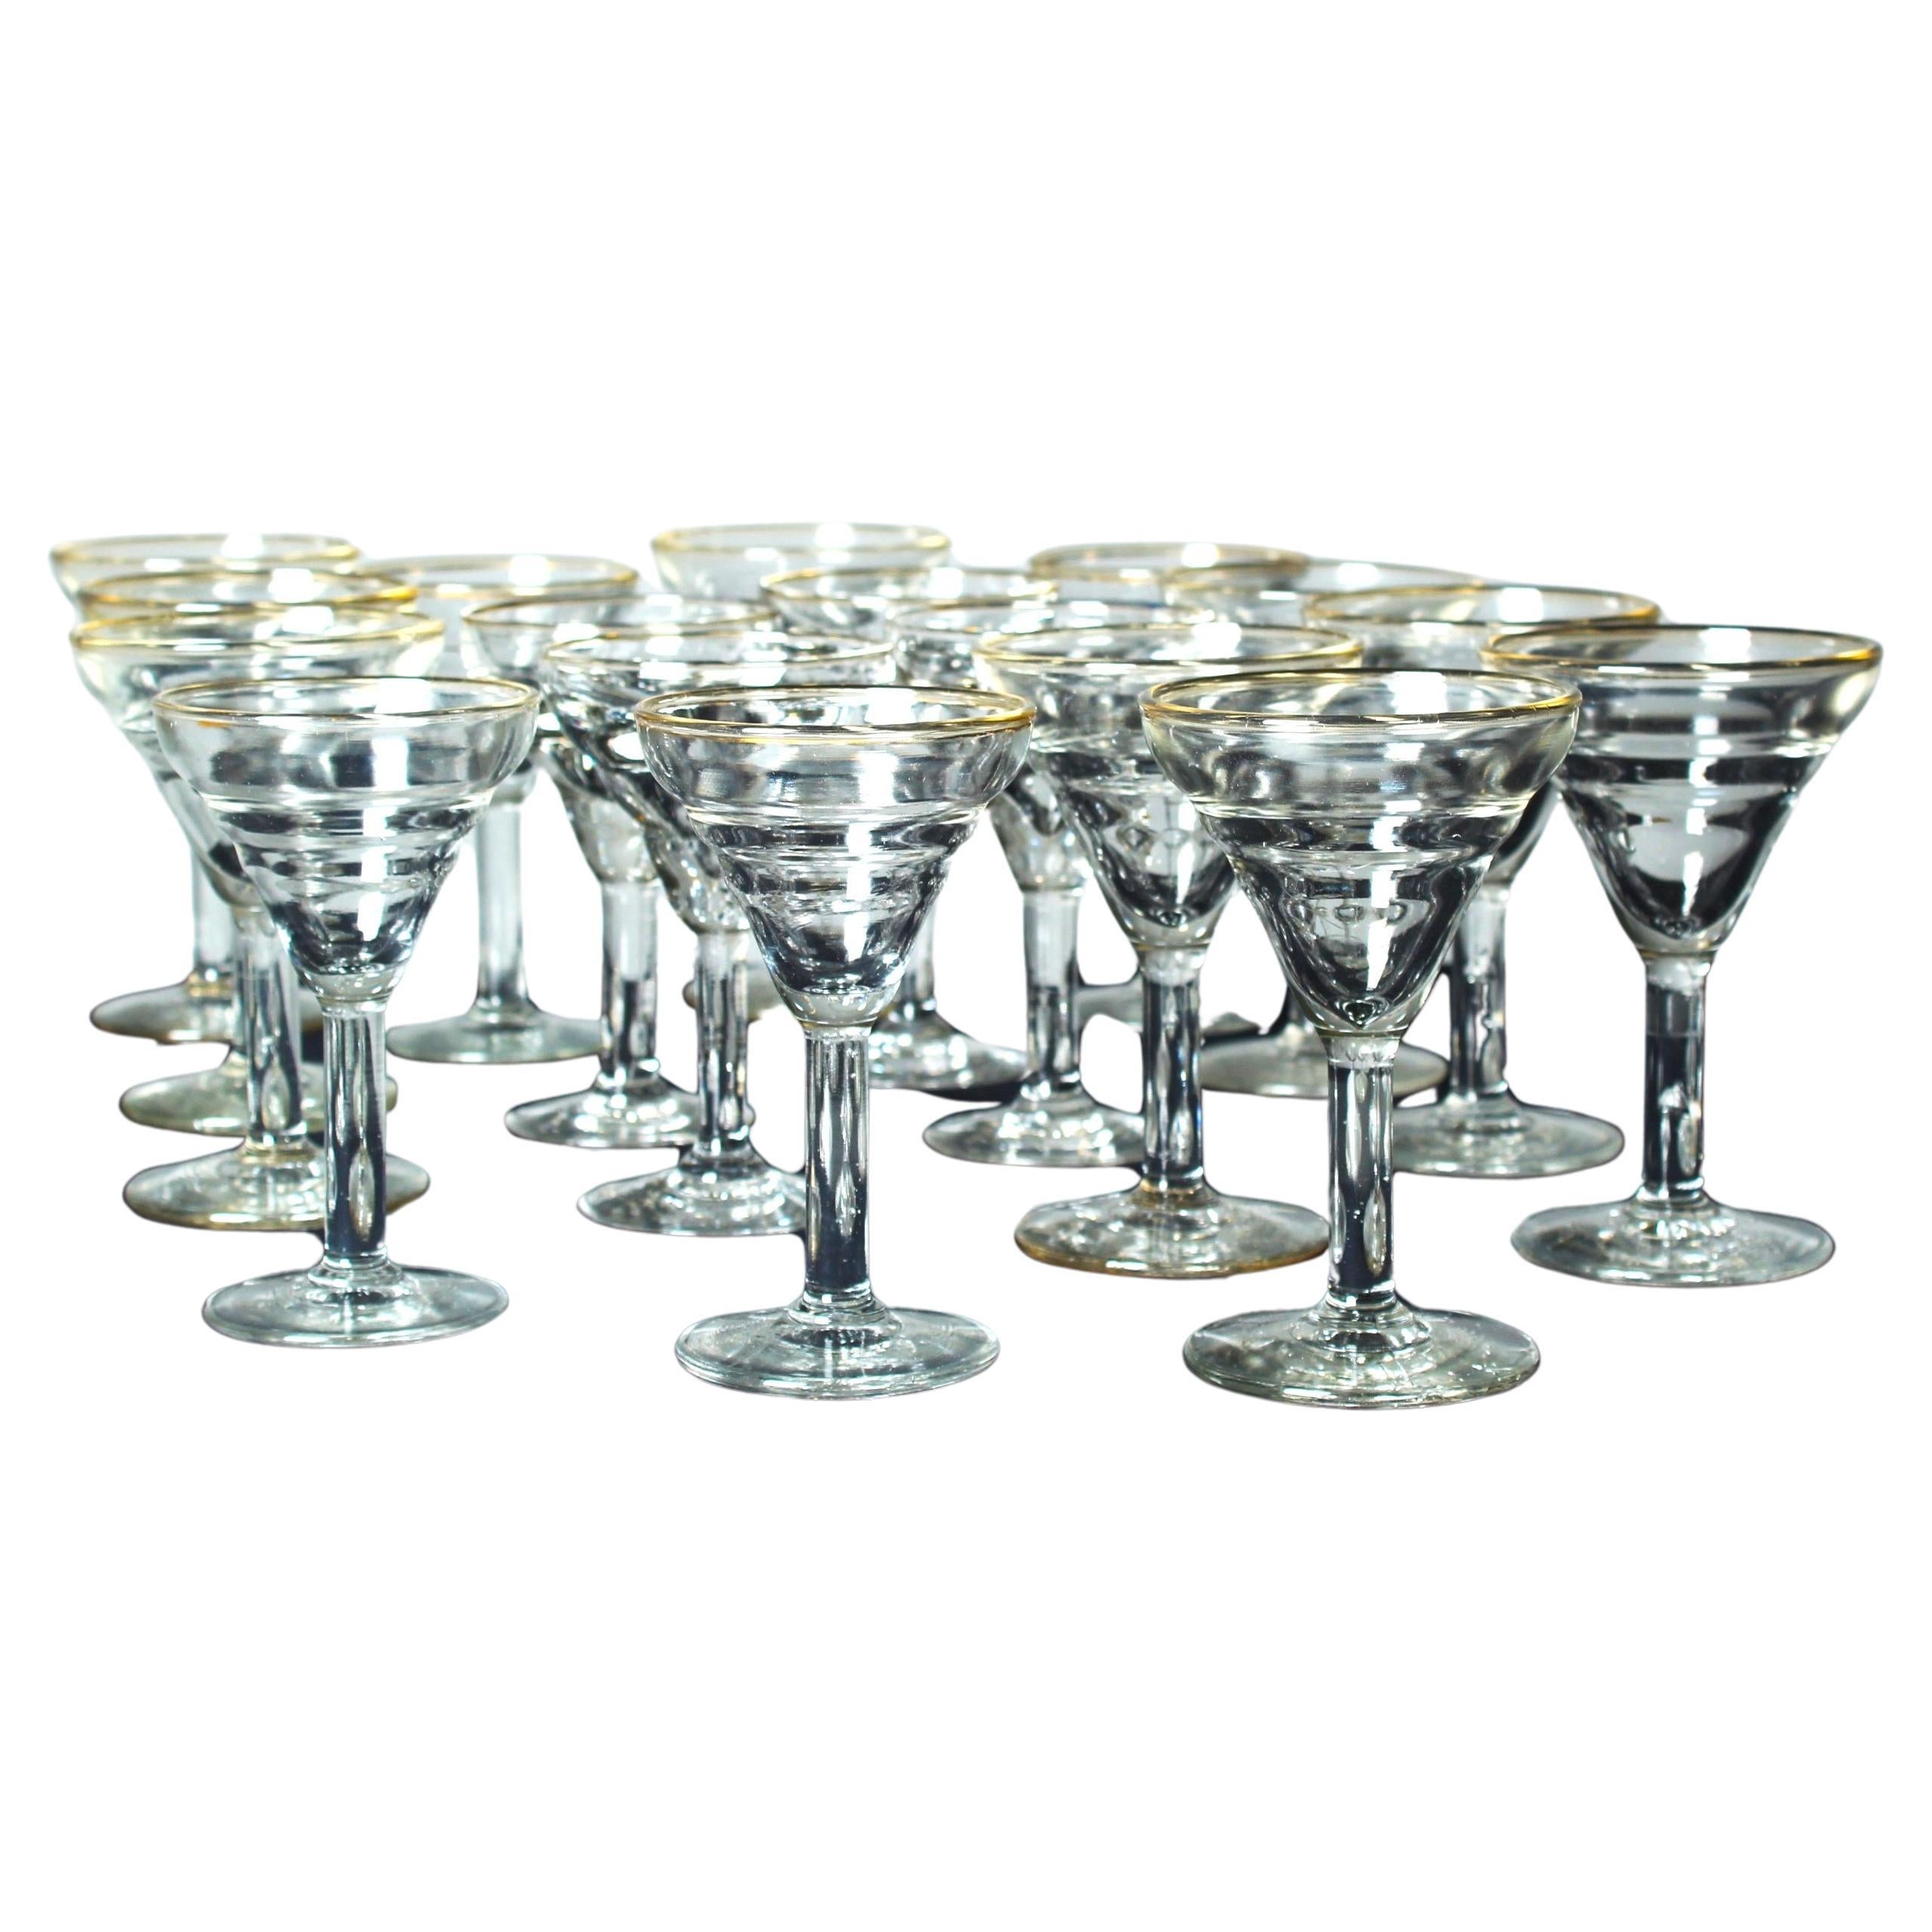 17 Art Nouveau Aperitif Glasses, 1900s, France, Crystal Glass With Gold Decor